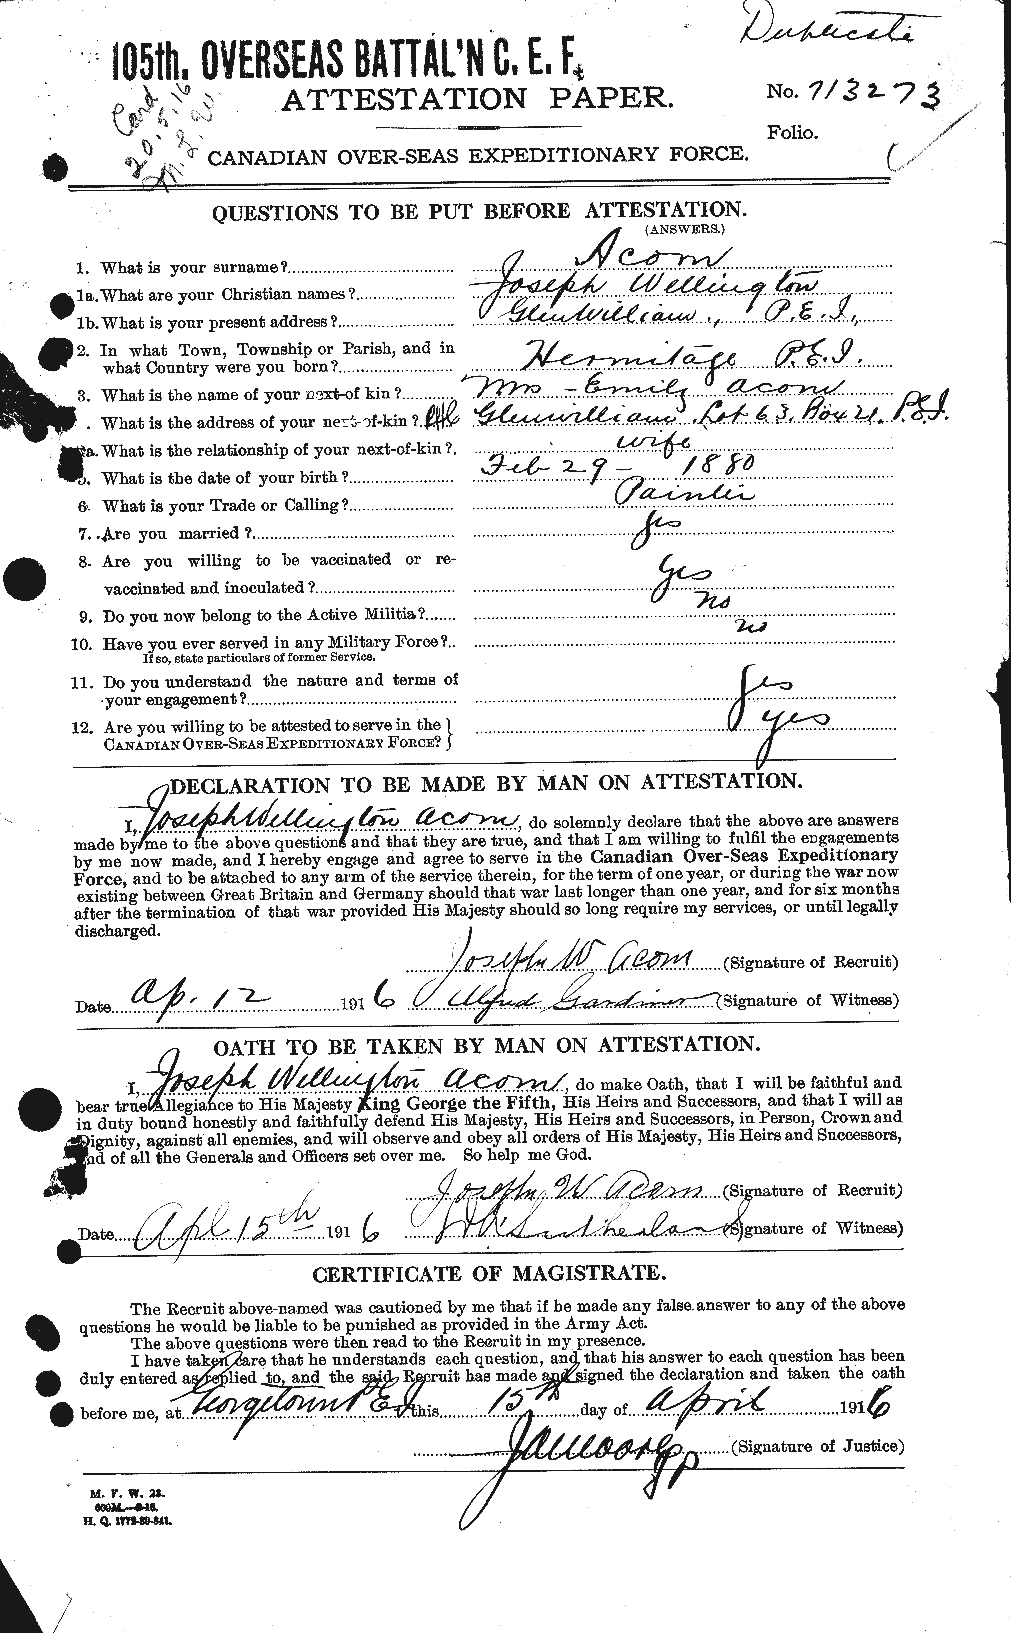 Personnel Records of the First World War - CEF 200849a